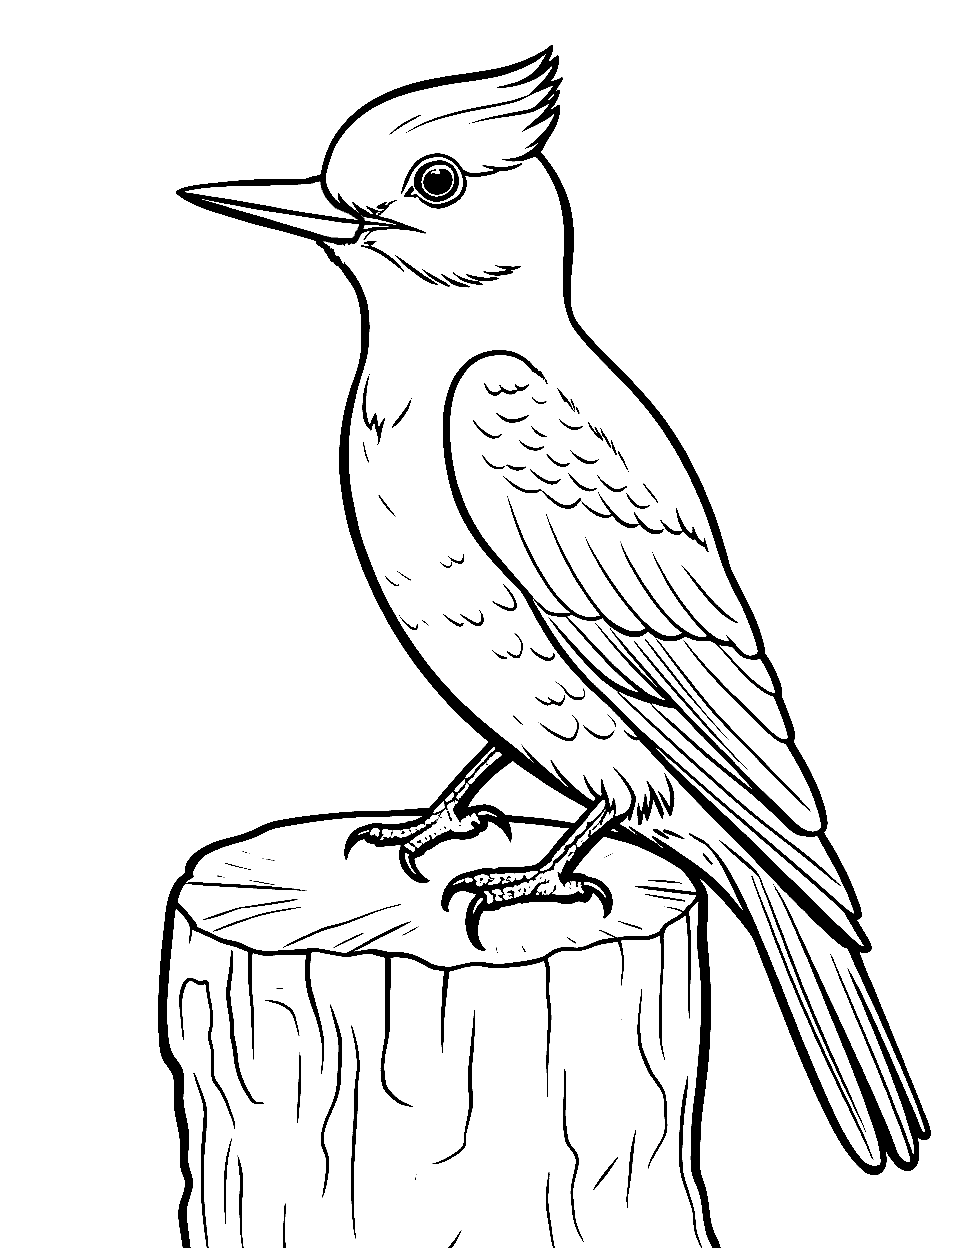 Woodpecker on a Log Coloring Page - A woodpecker on a log ready to peck away.